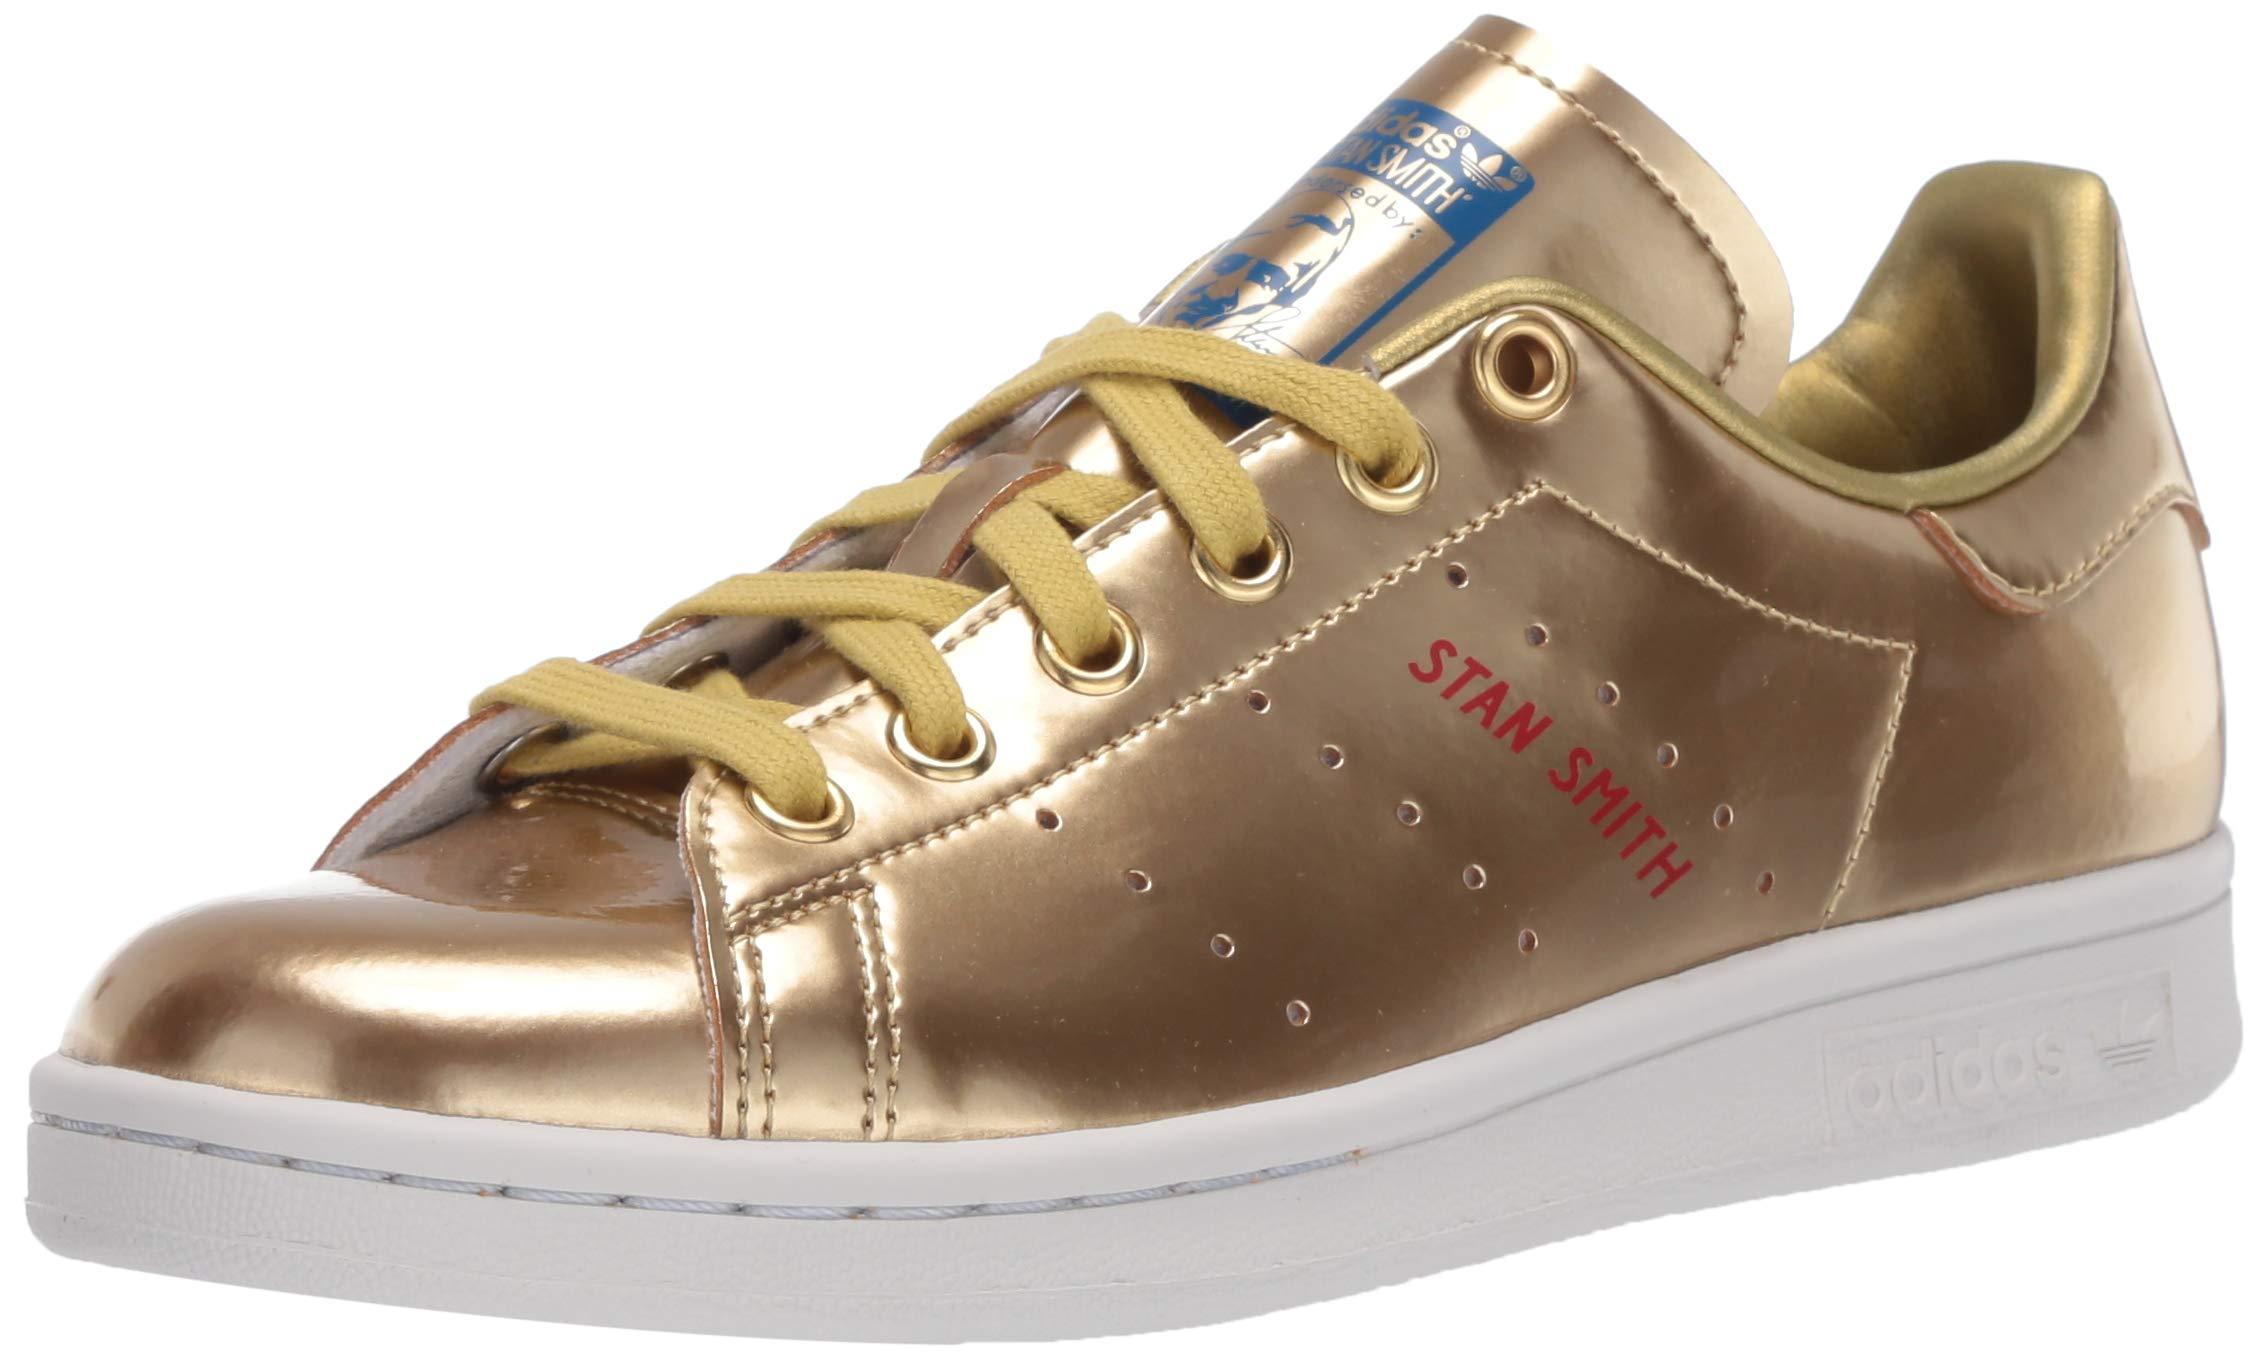 adidas Originals Leather Stan Smith in Gold/White (Metallic) for Men - Save  79% - Lyst